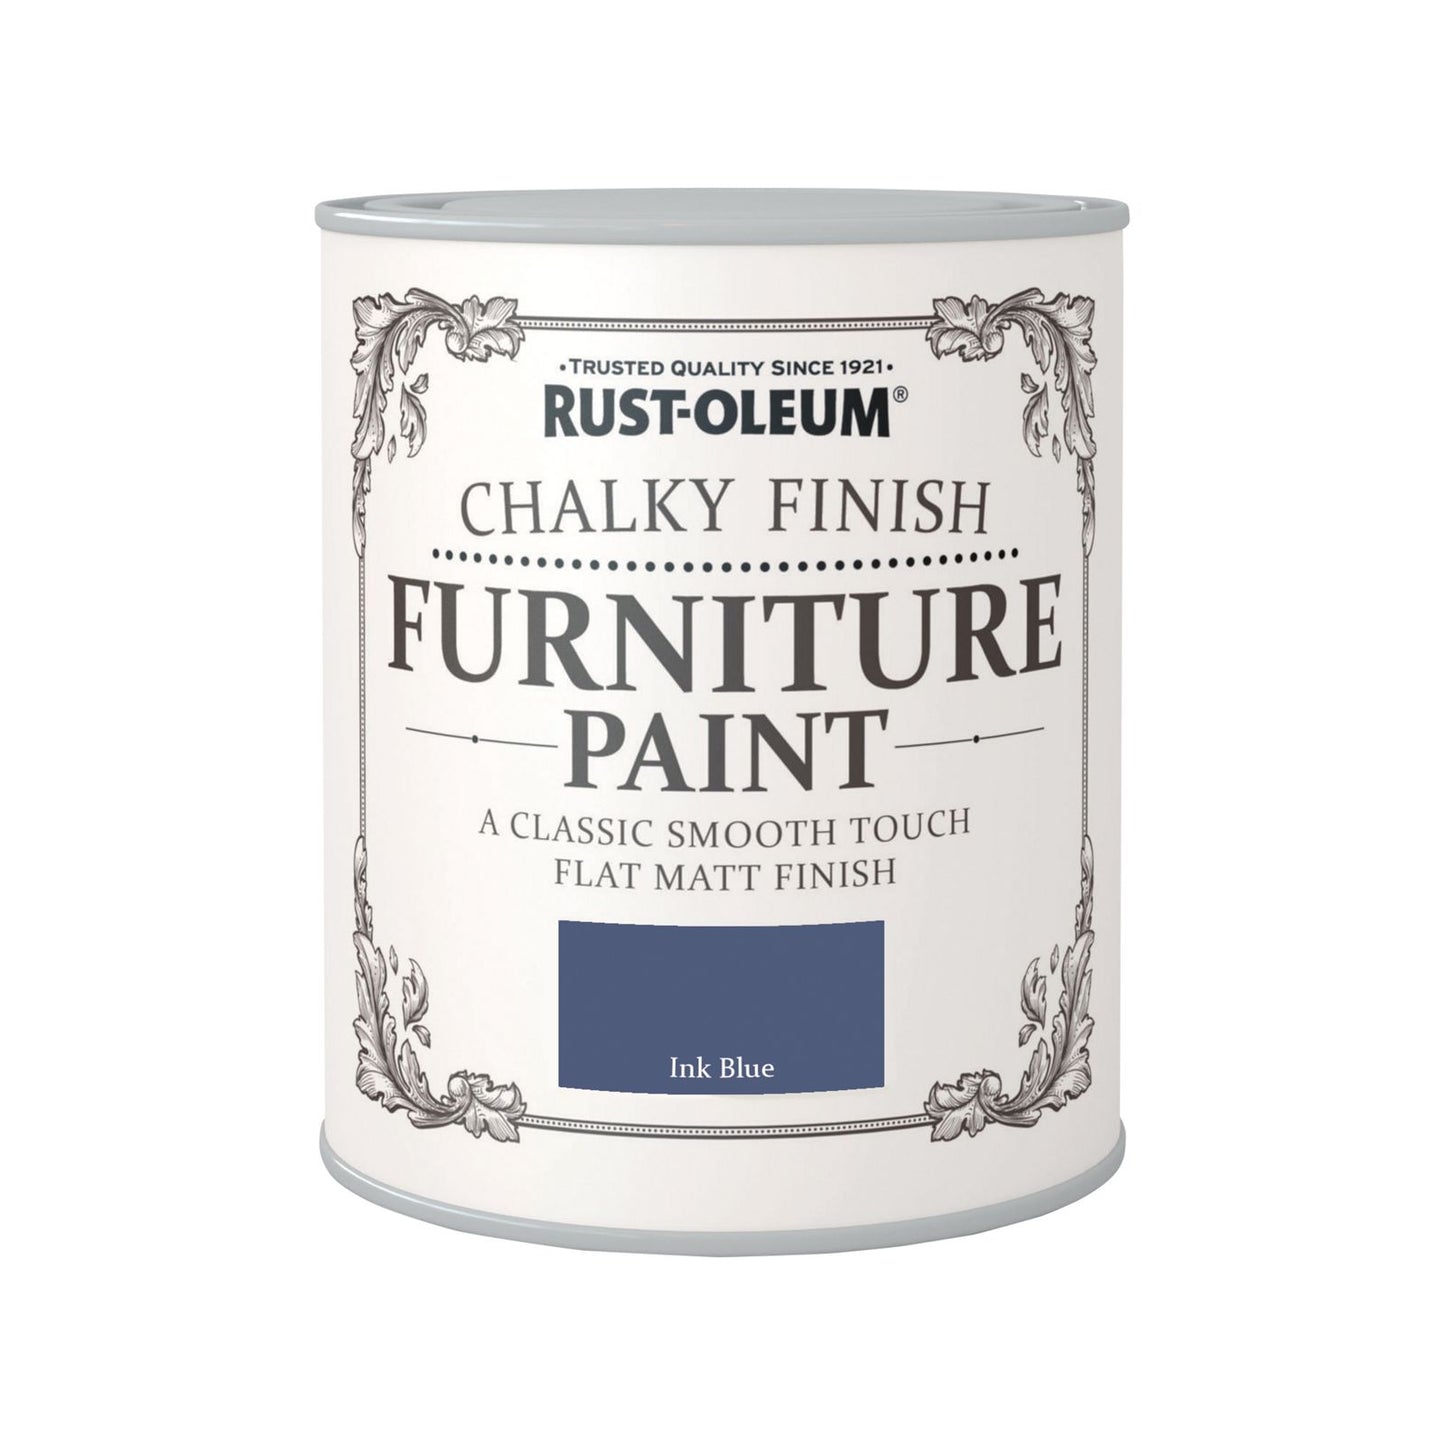 Rust-Oleum Chalky Finish Furniture Paint Ink Blue